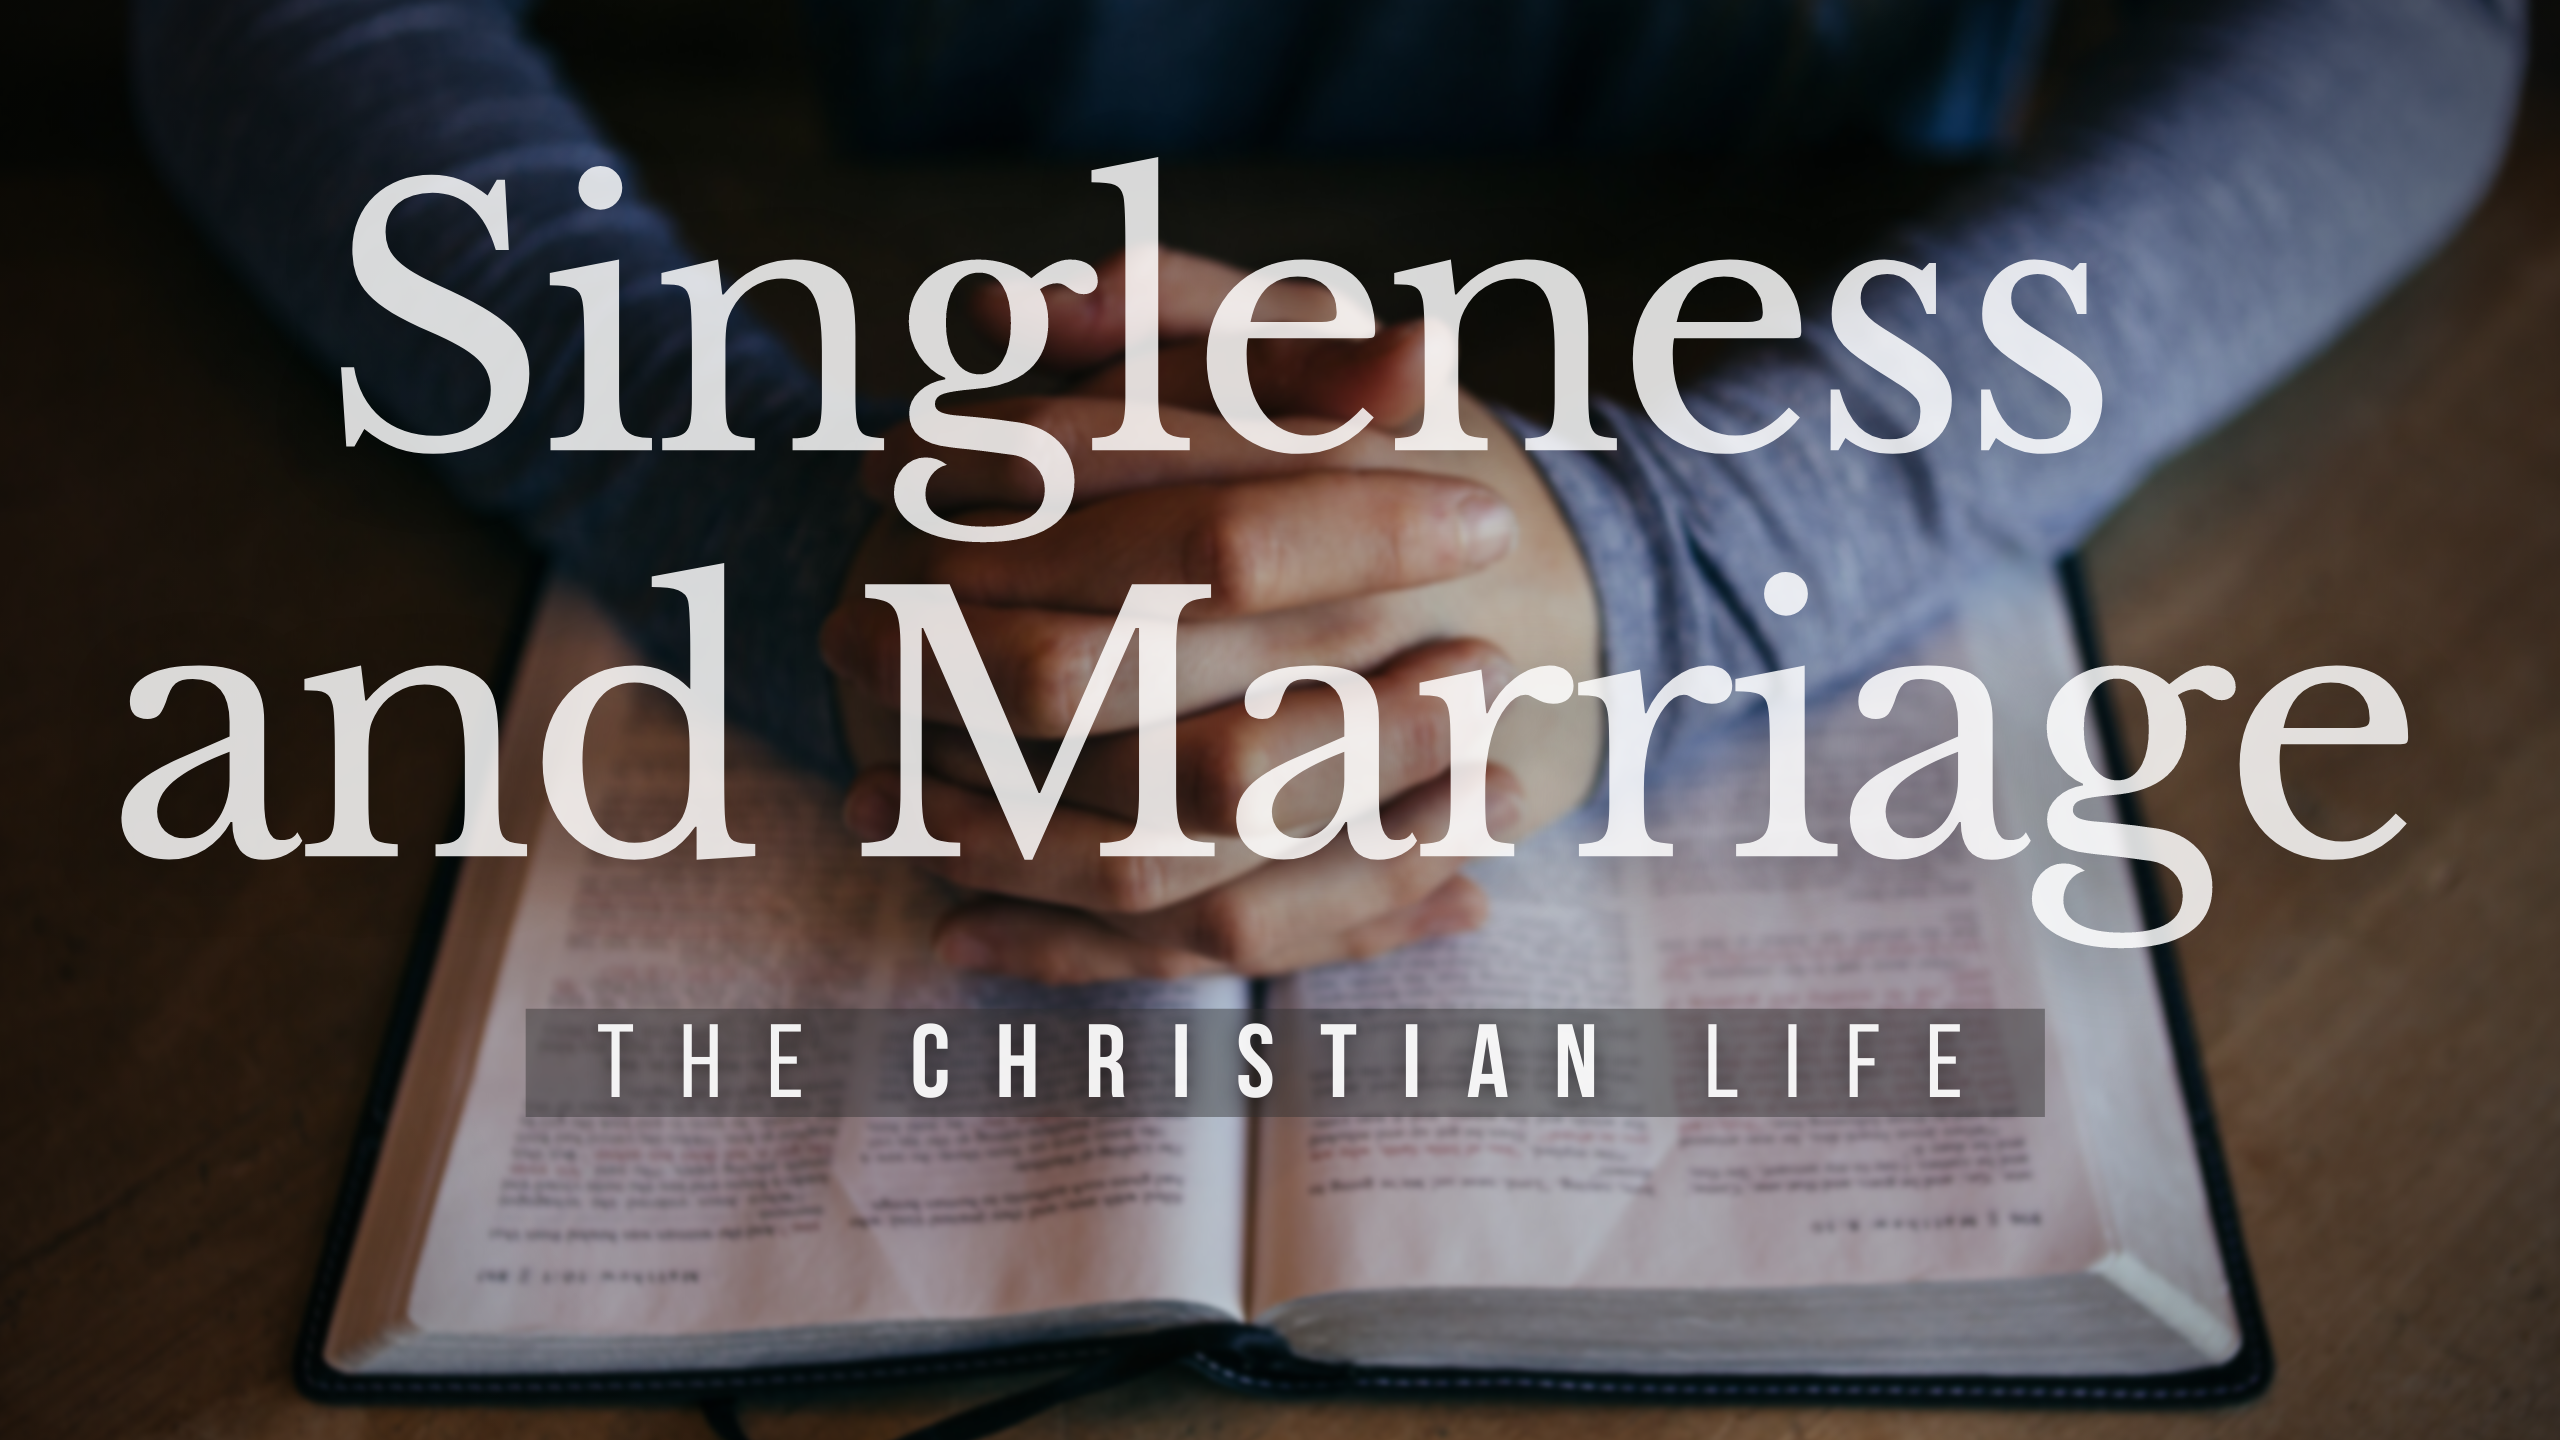 BIBLE STUDY: The Christian life - Singleness and Marriage  Image